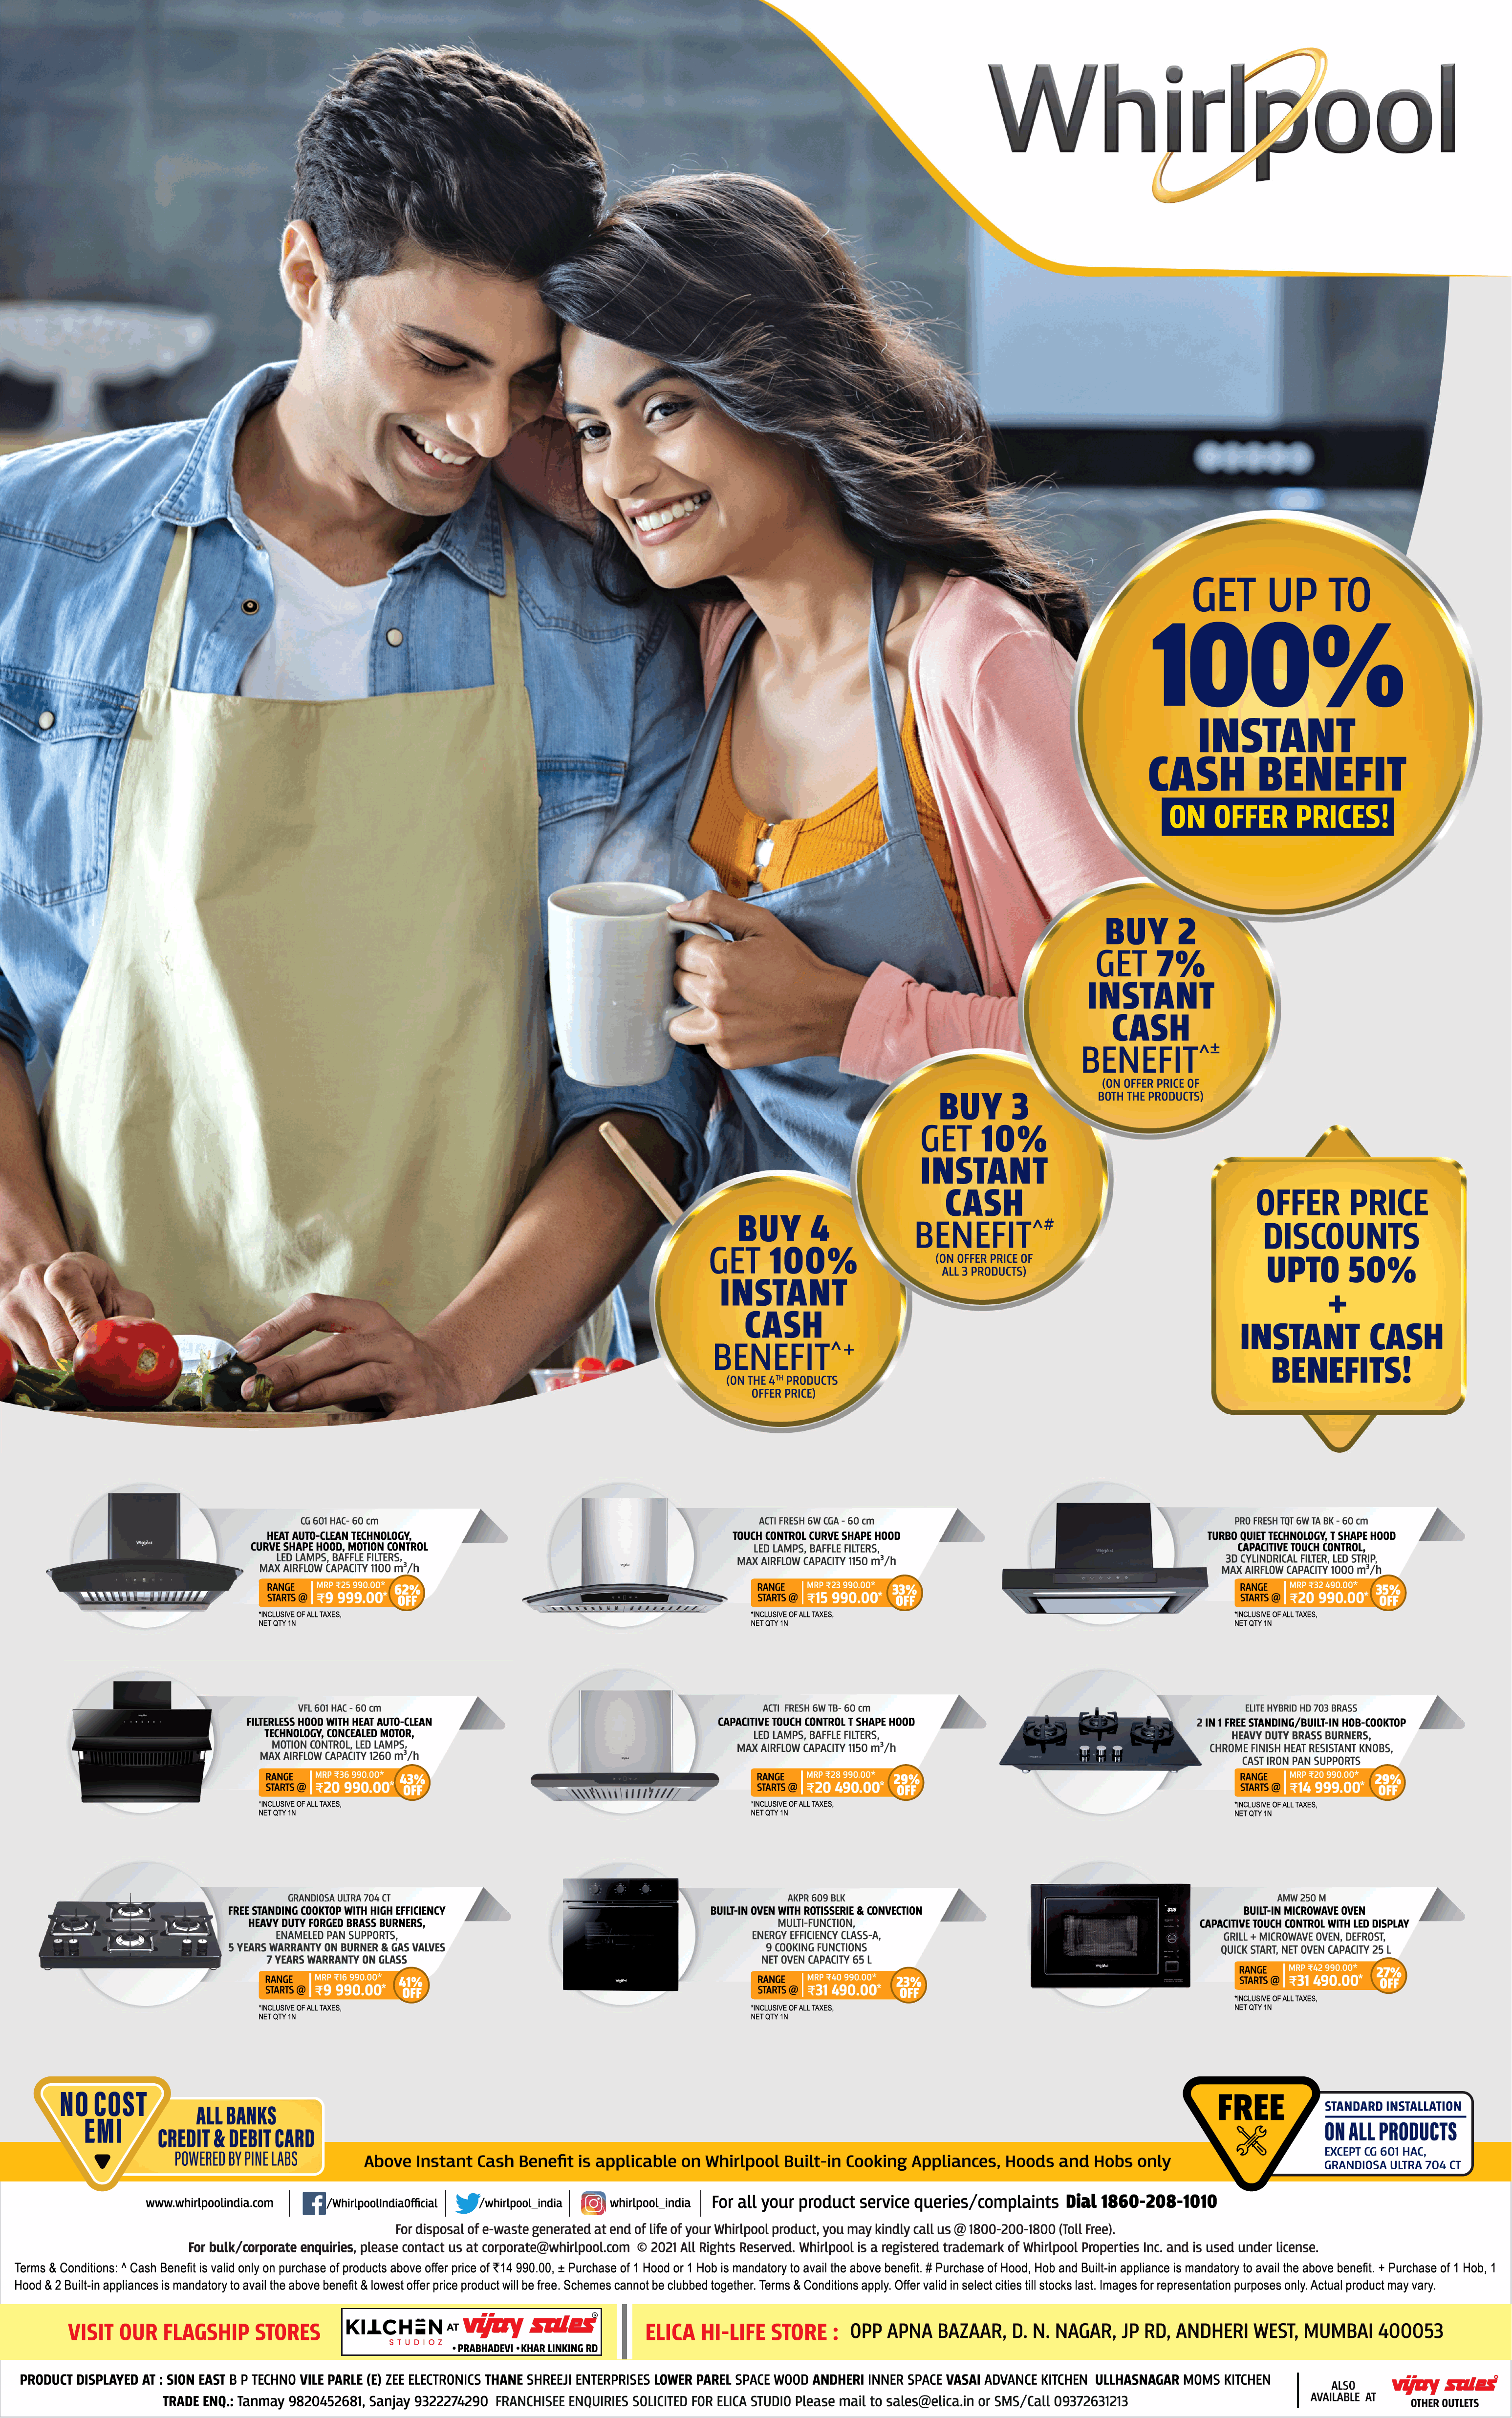 Whirlpool Chimneys Get Up To 100% Instant Cash Benefit On Offer Prices Ad Times Of India Mumbai 10-7-2021